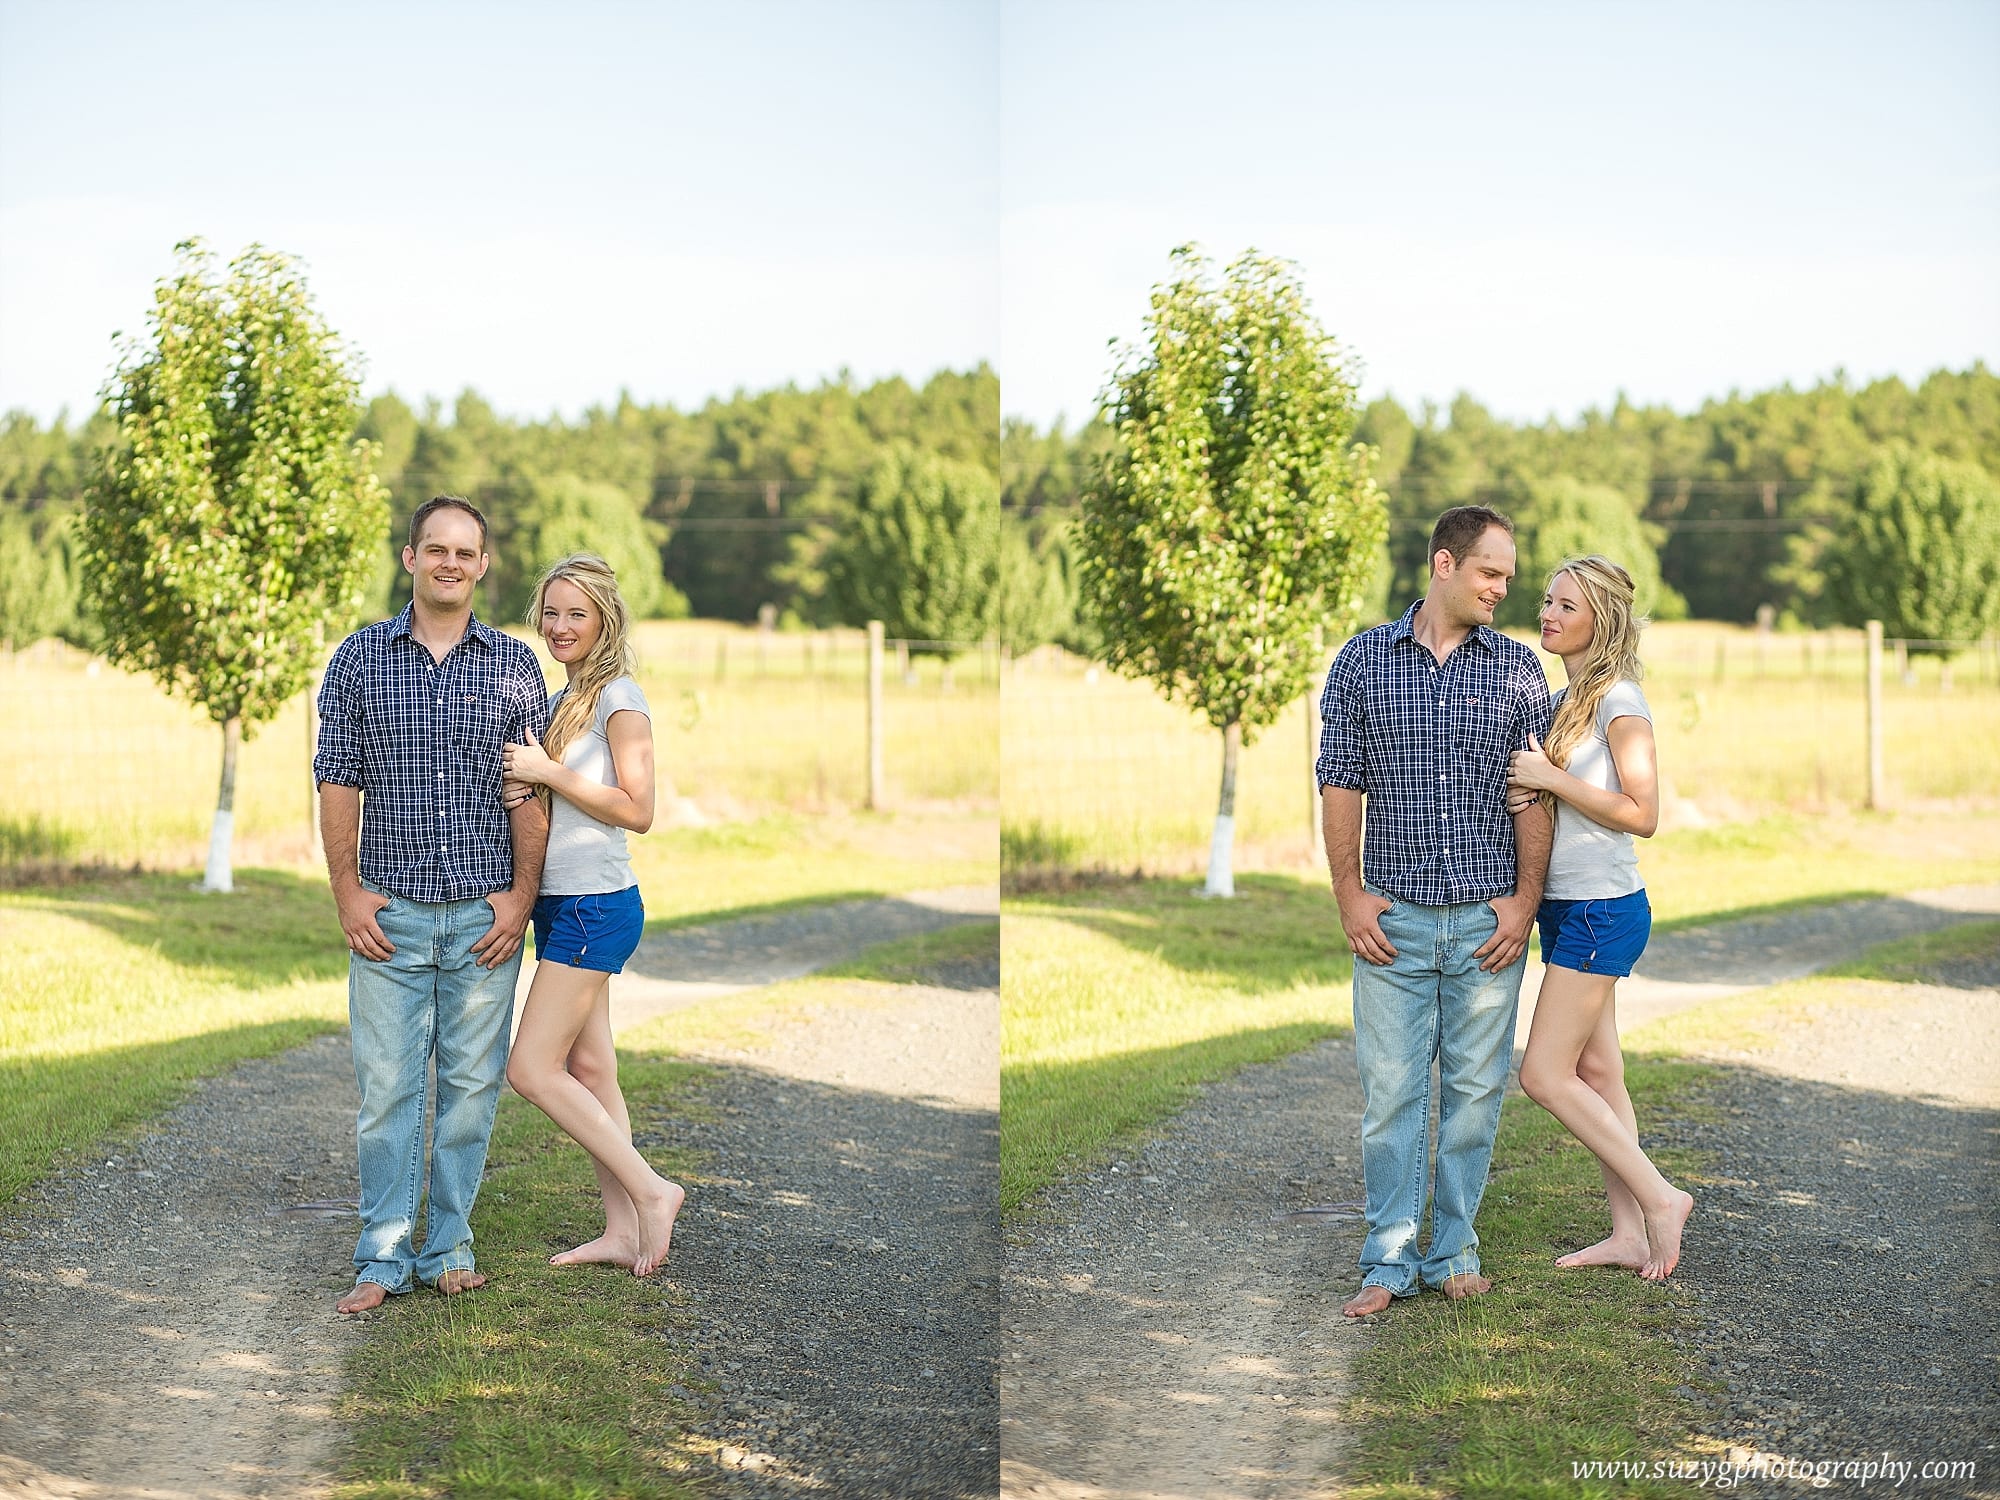 engagements-new orleans-texas-baton rouge-lake charles-suzy g-photography-suzygphotography_0023